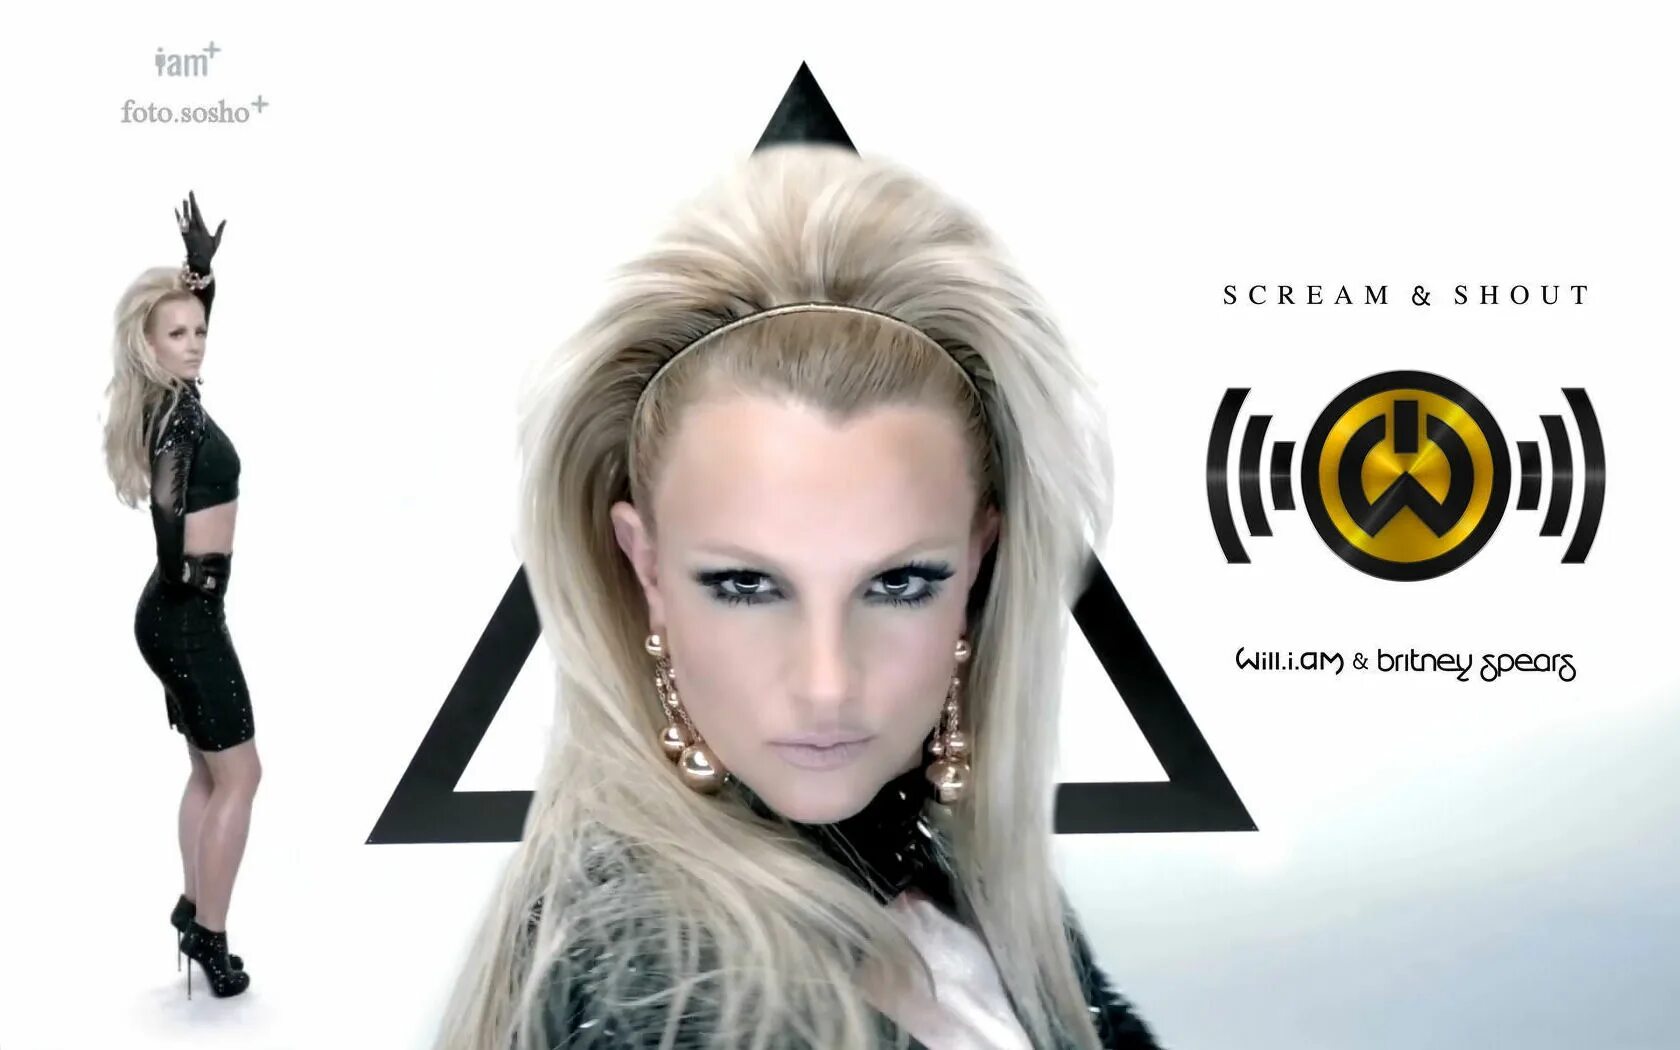 Screaming feat. Бритни Спирс will i am. Бритни Спирс Scream. Scream & Shout ft. Britney Spears. Will i am Britney Spears Scream Shout.